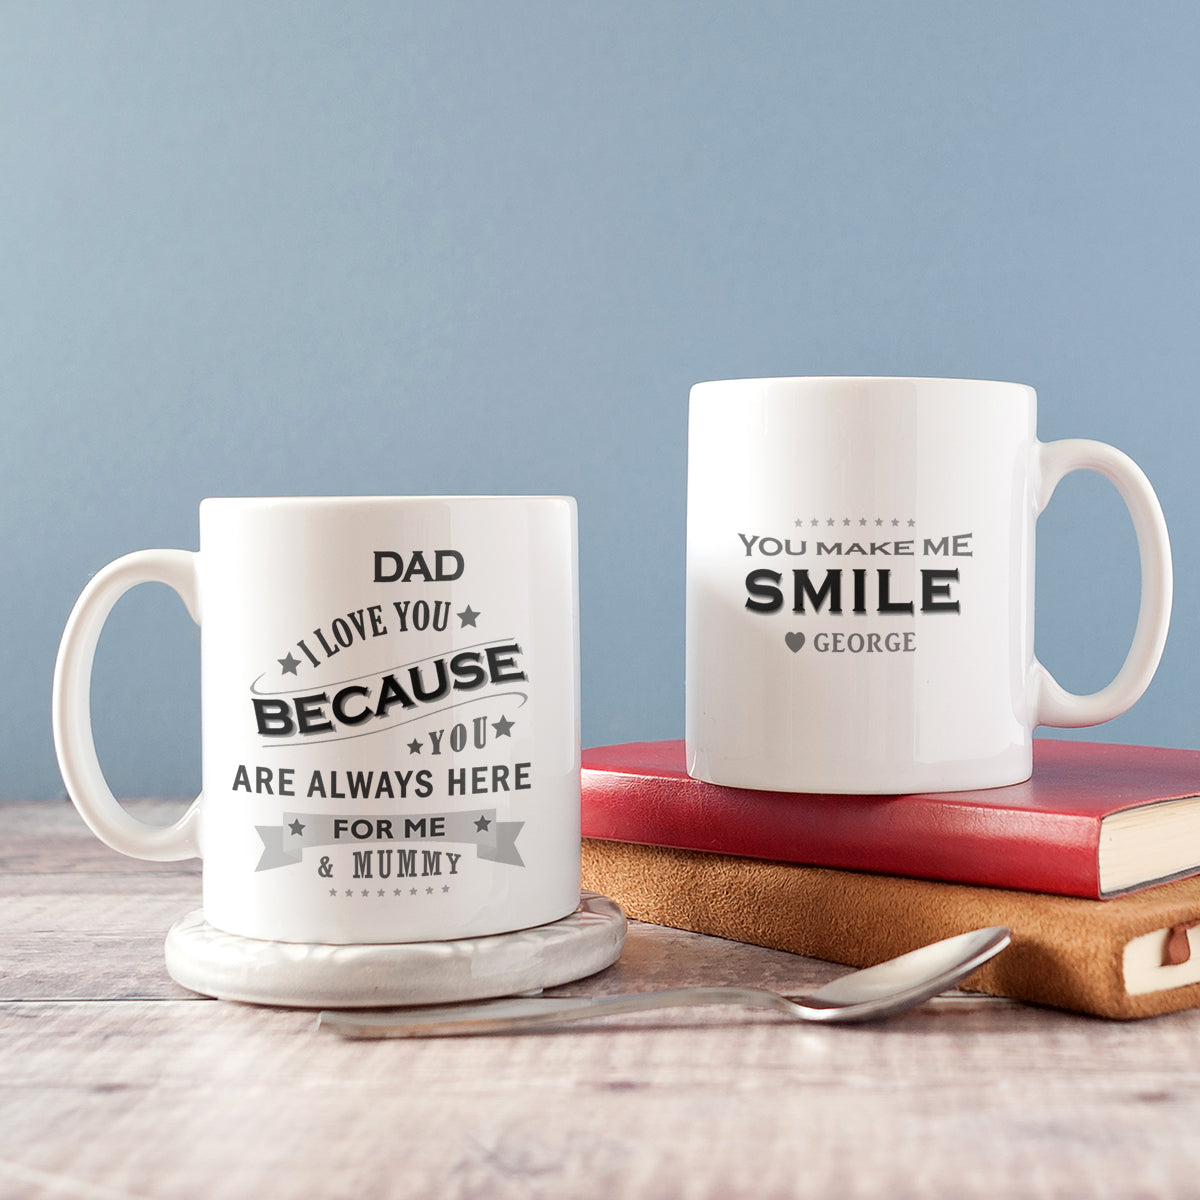 Personalised Father's Day Mug – The 